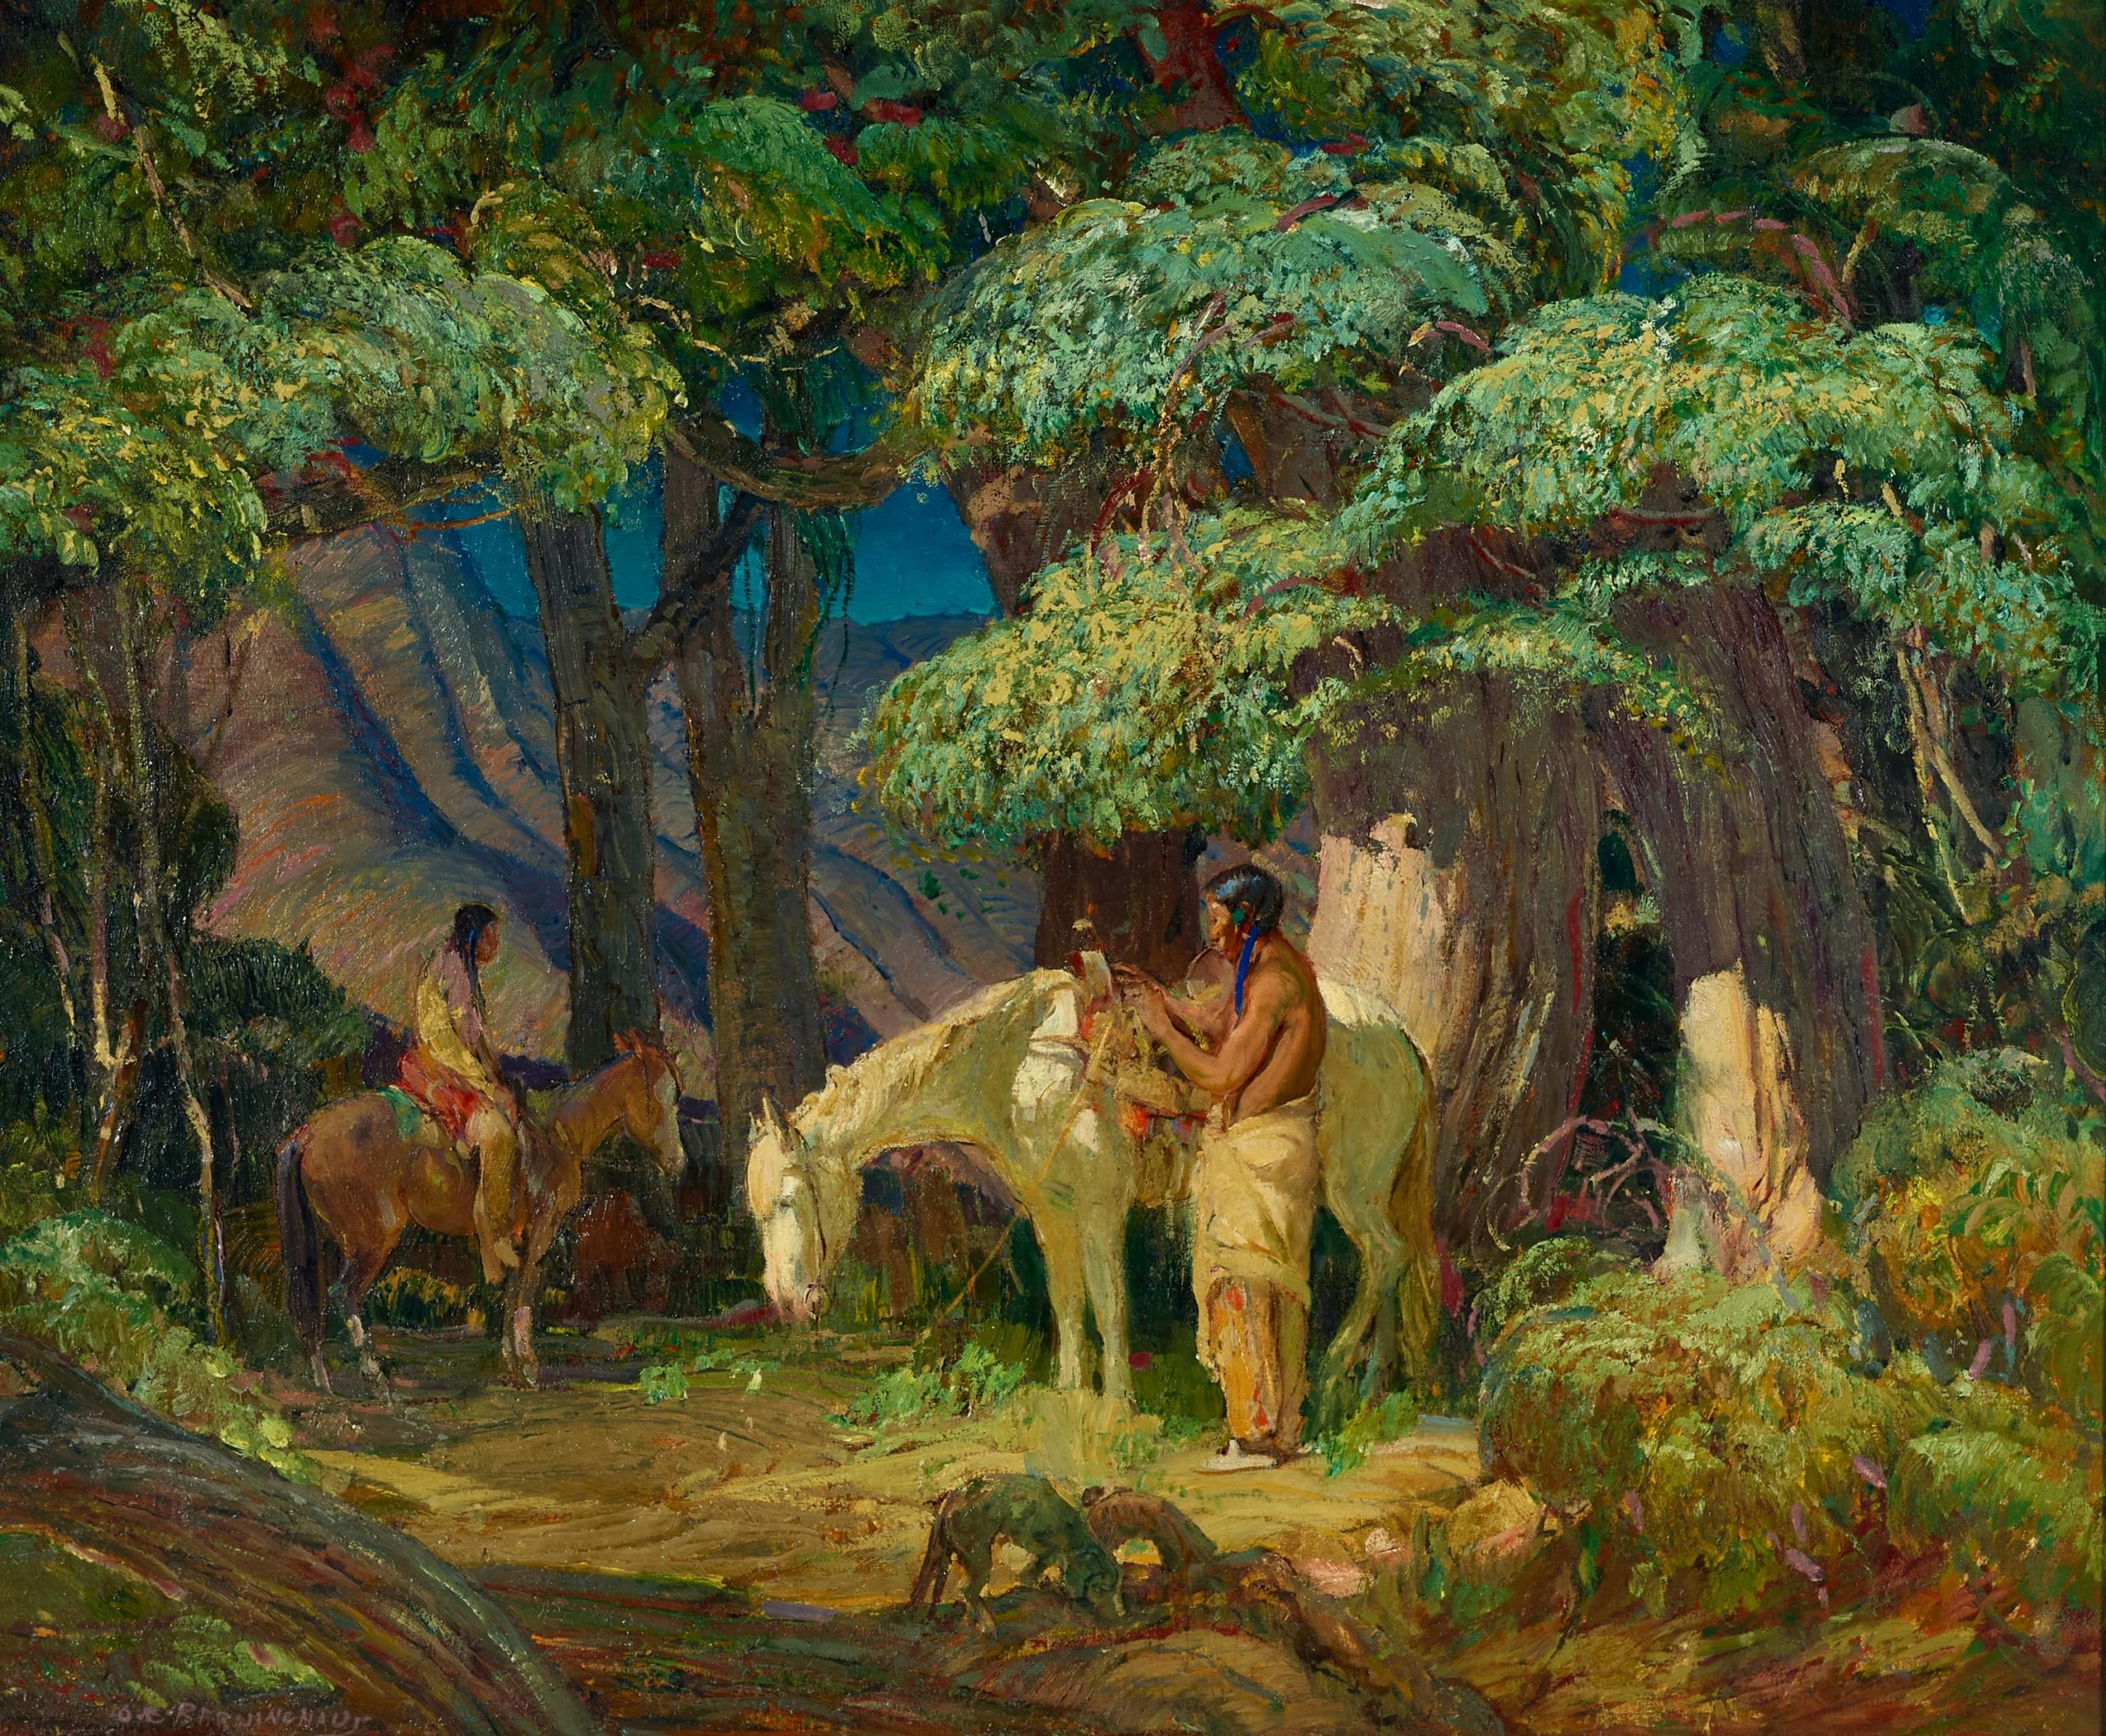 "Ancient Forest of the Indians" by Oscar Edmund Berninghaus